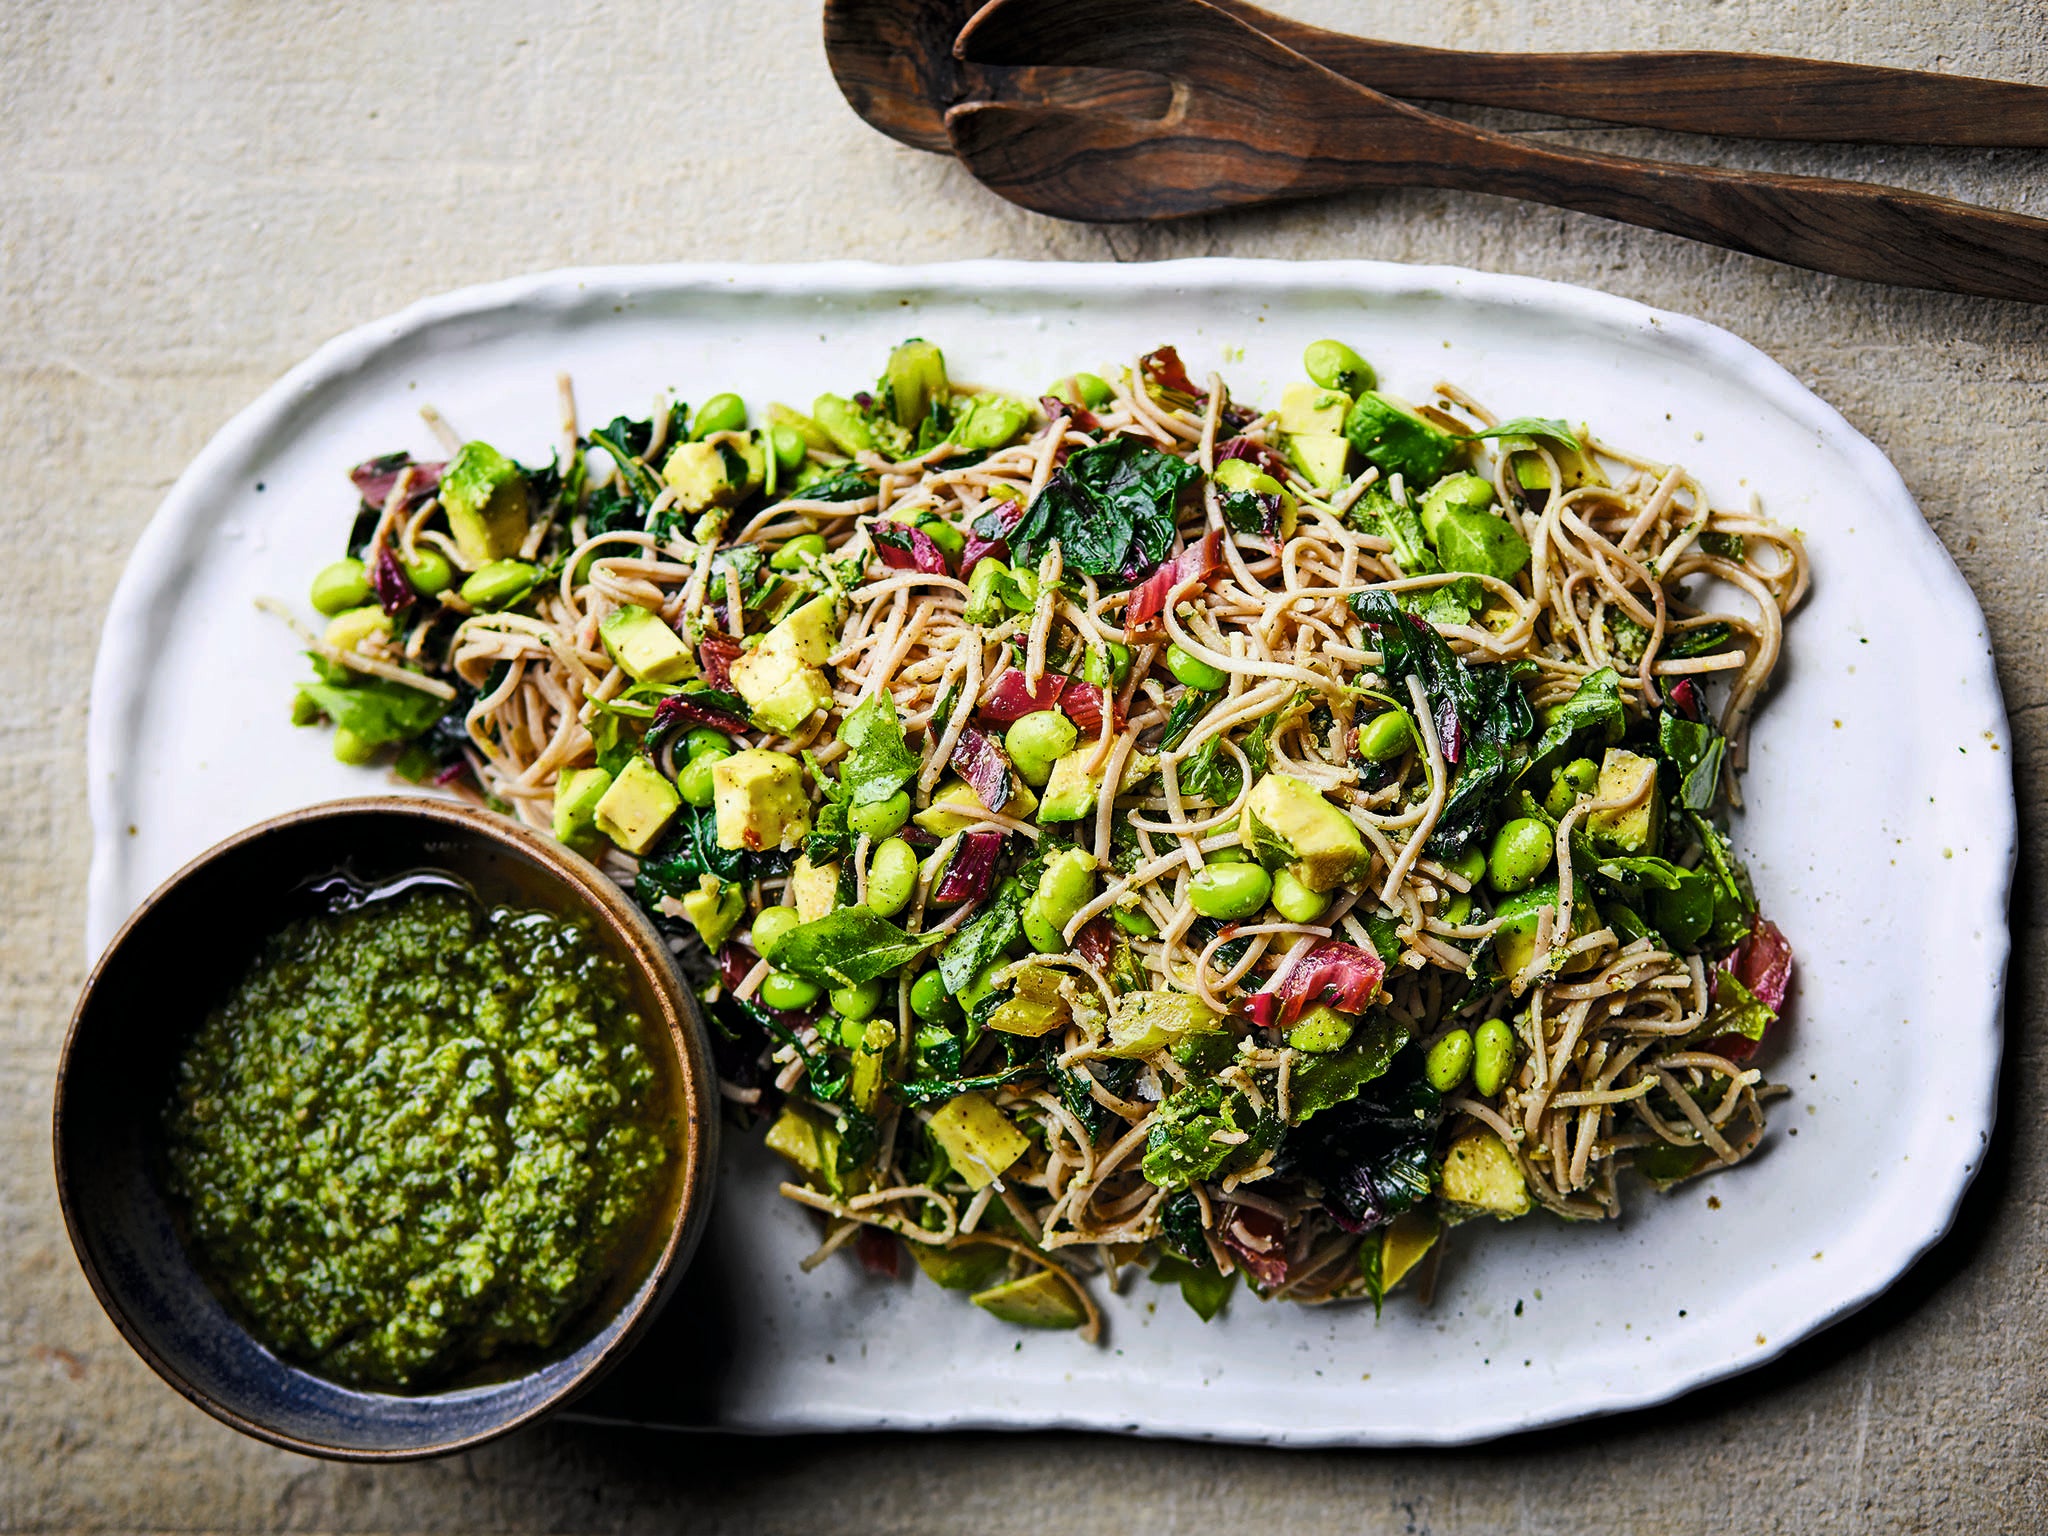 Bucking the trend: this noodle dish is made in Italy, not just Asia